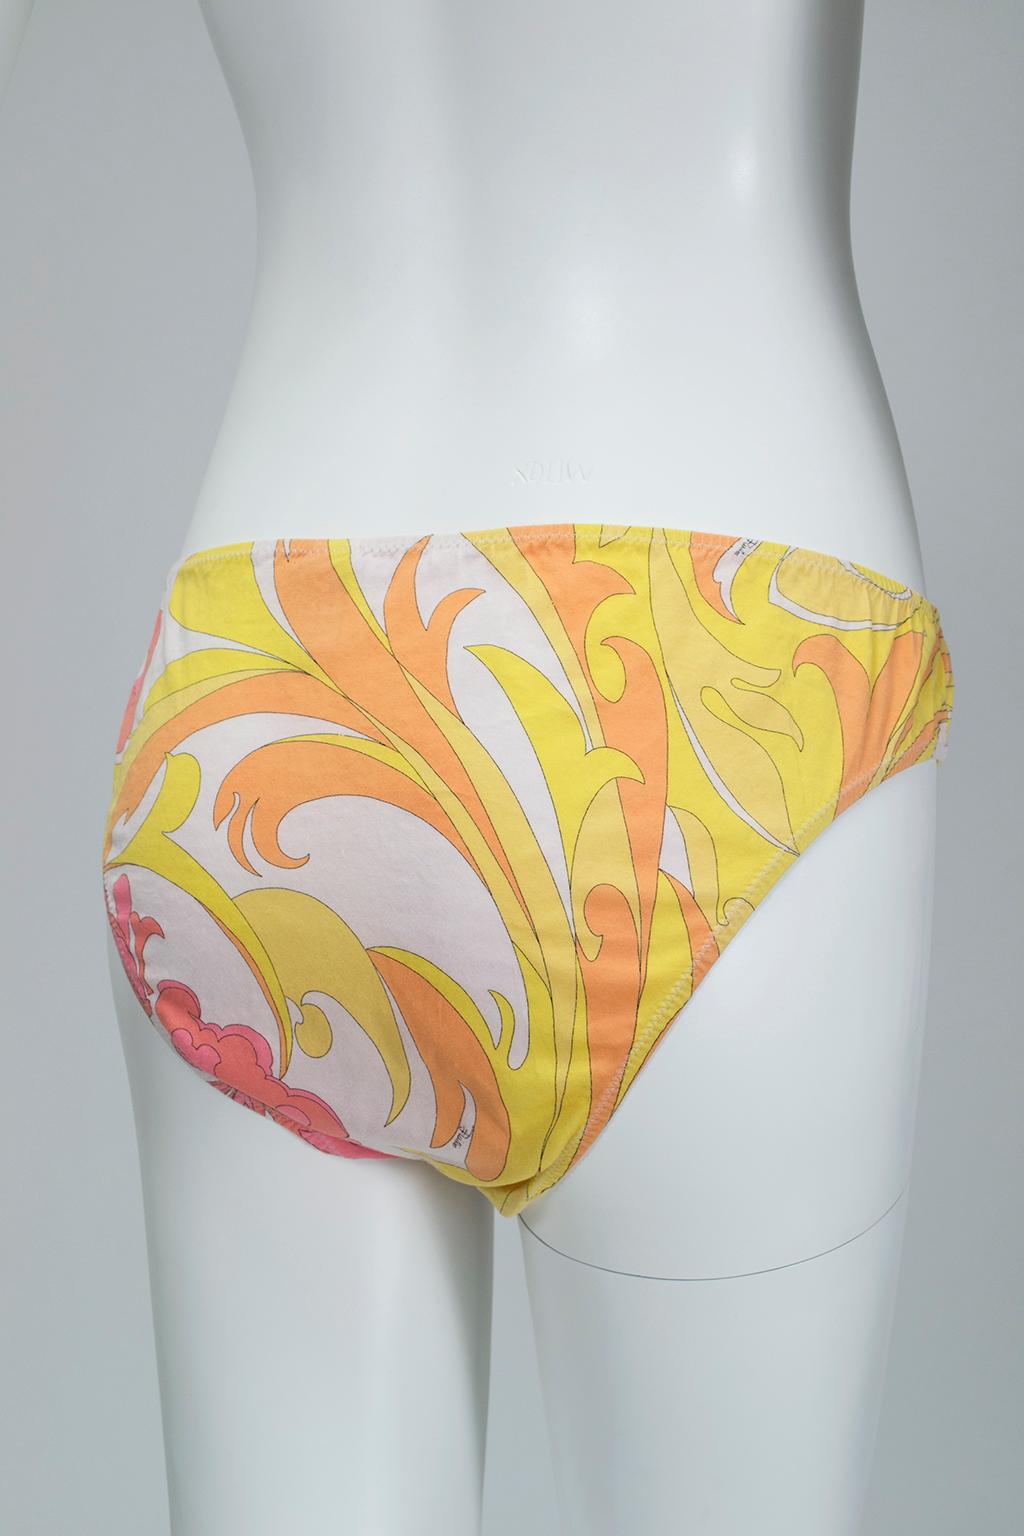 Women's Emilio Pucci Pink Yellow Psychedelic Lounge Bra and Panty Set- S-M, 21st Century For Sale